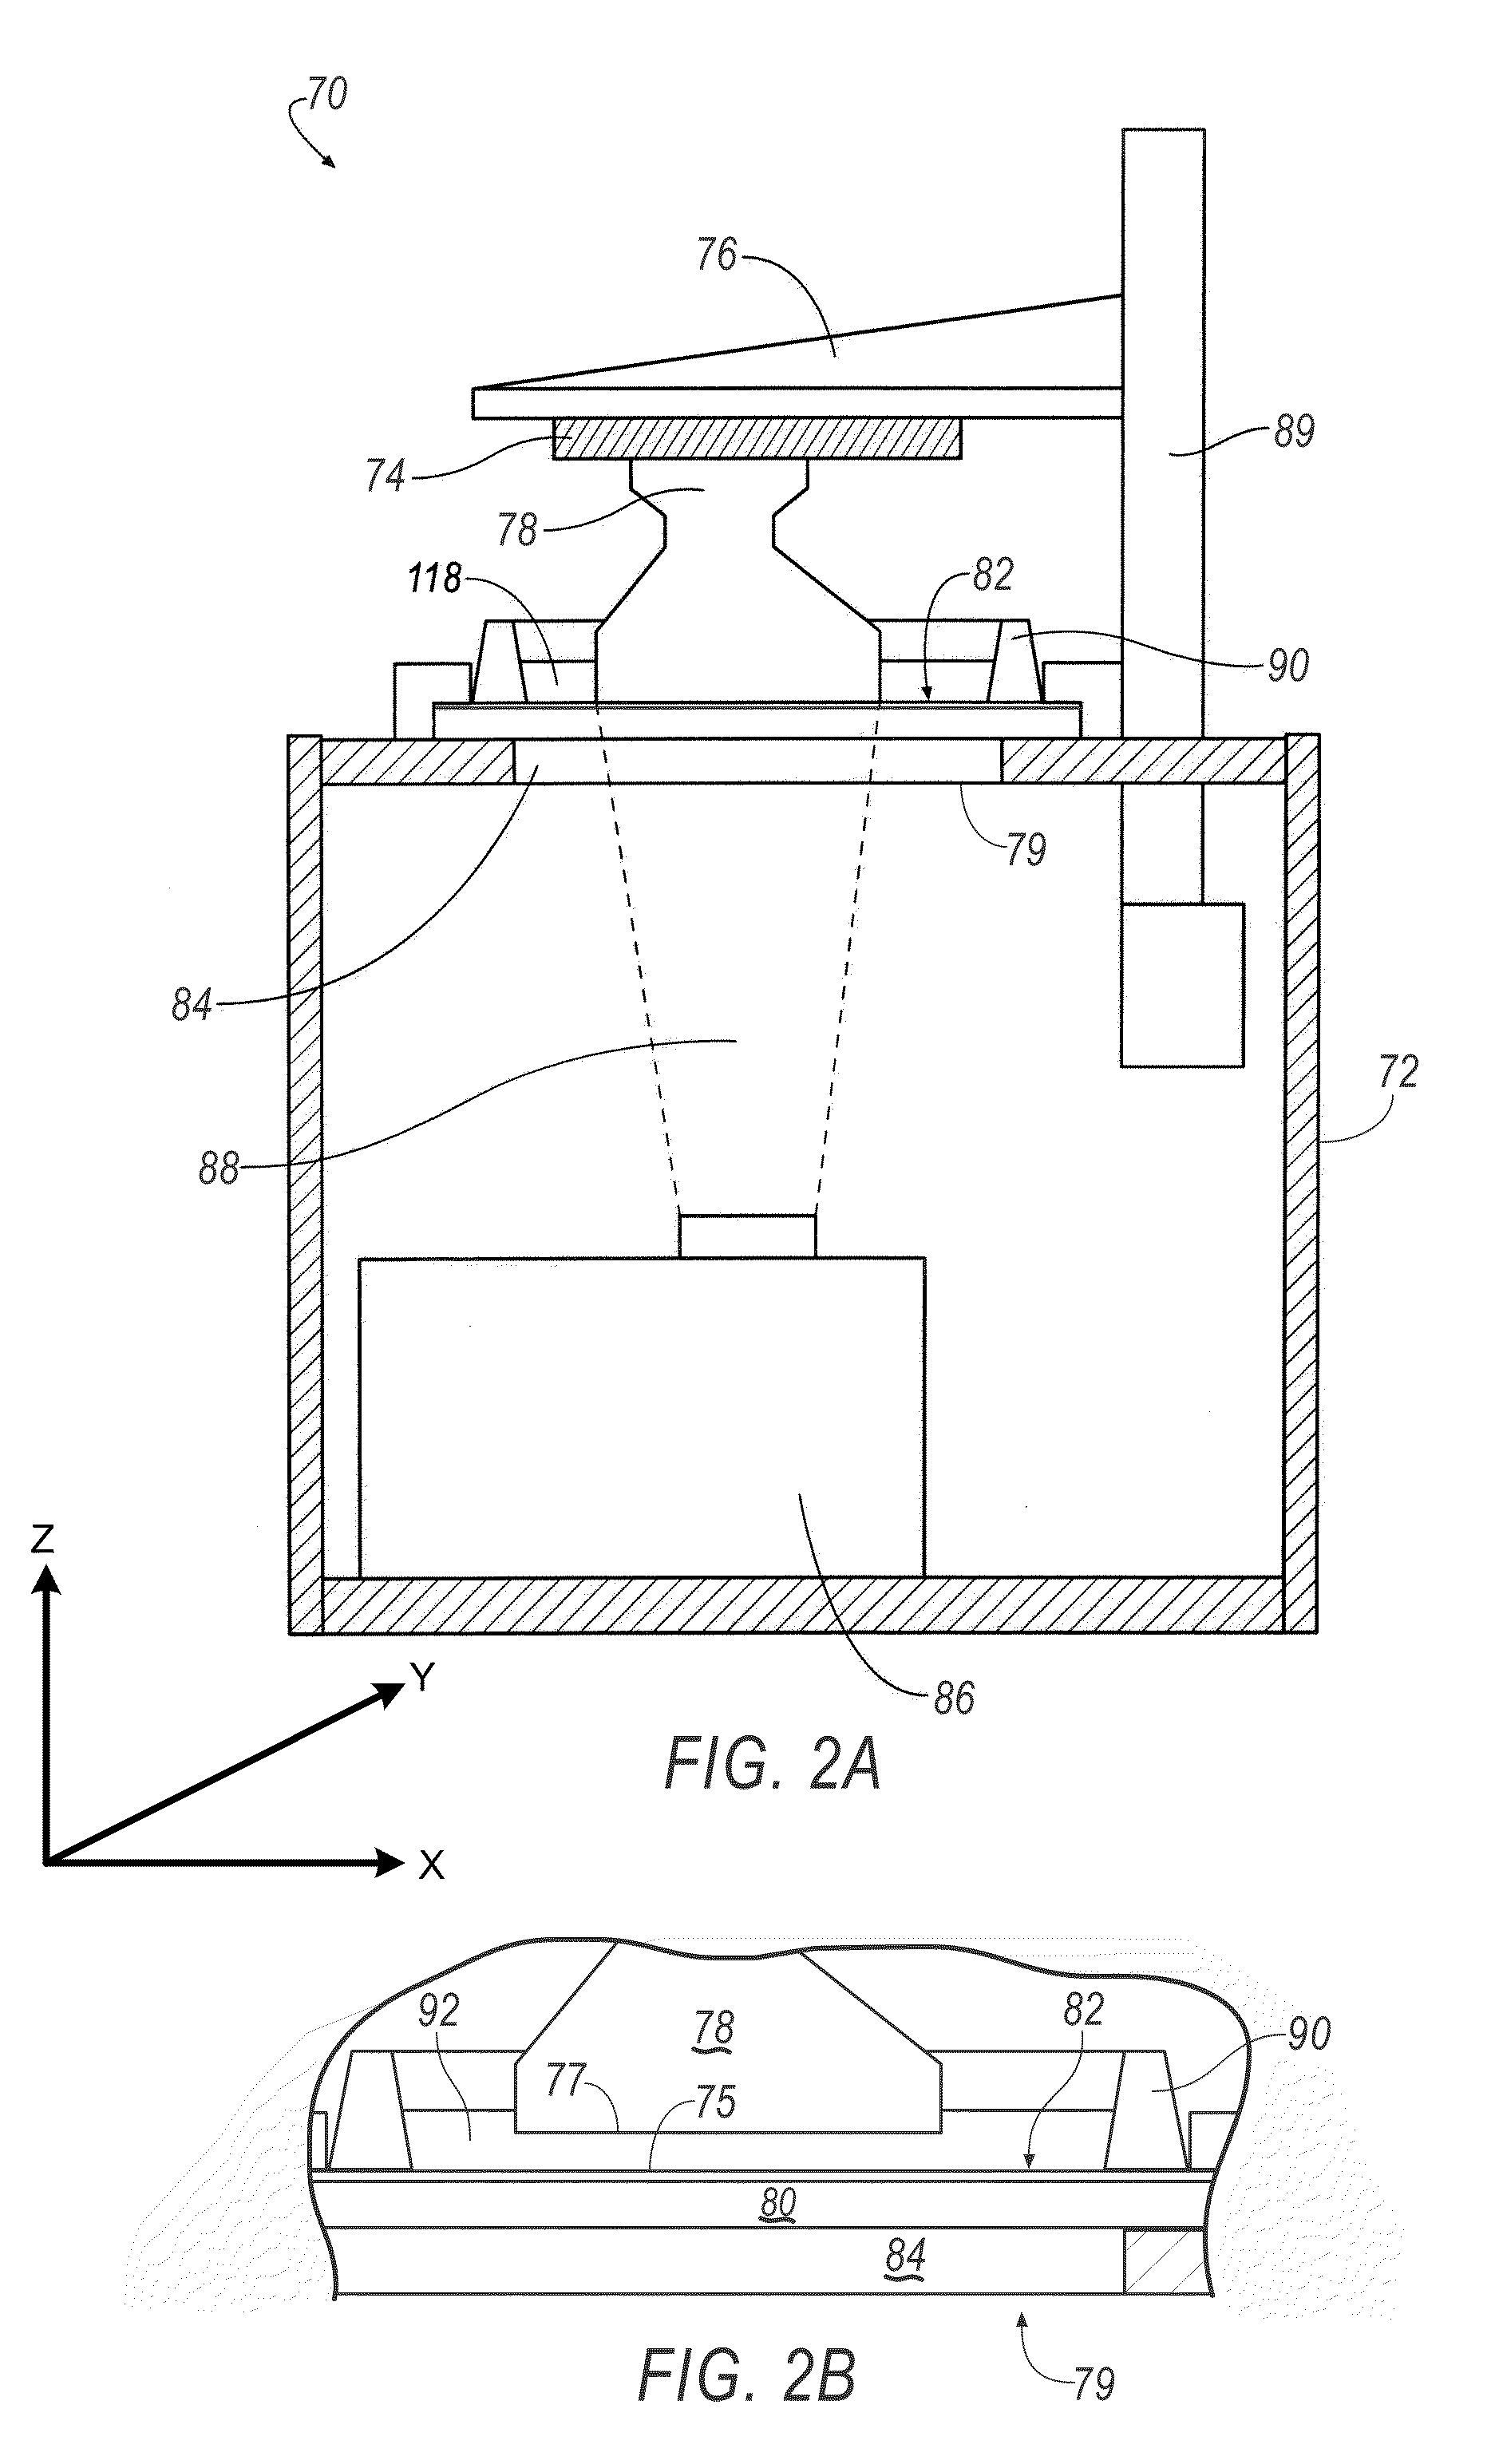 Method of reducing the force required to separate a solidified object from a substrate